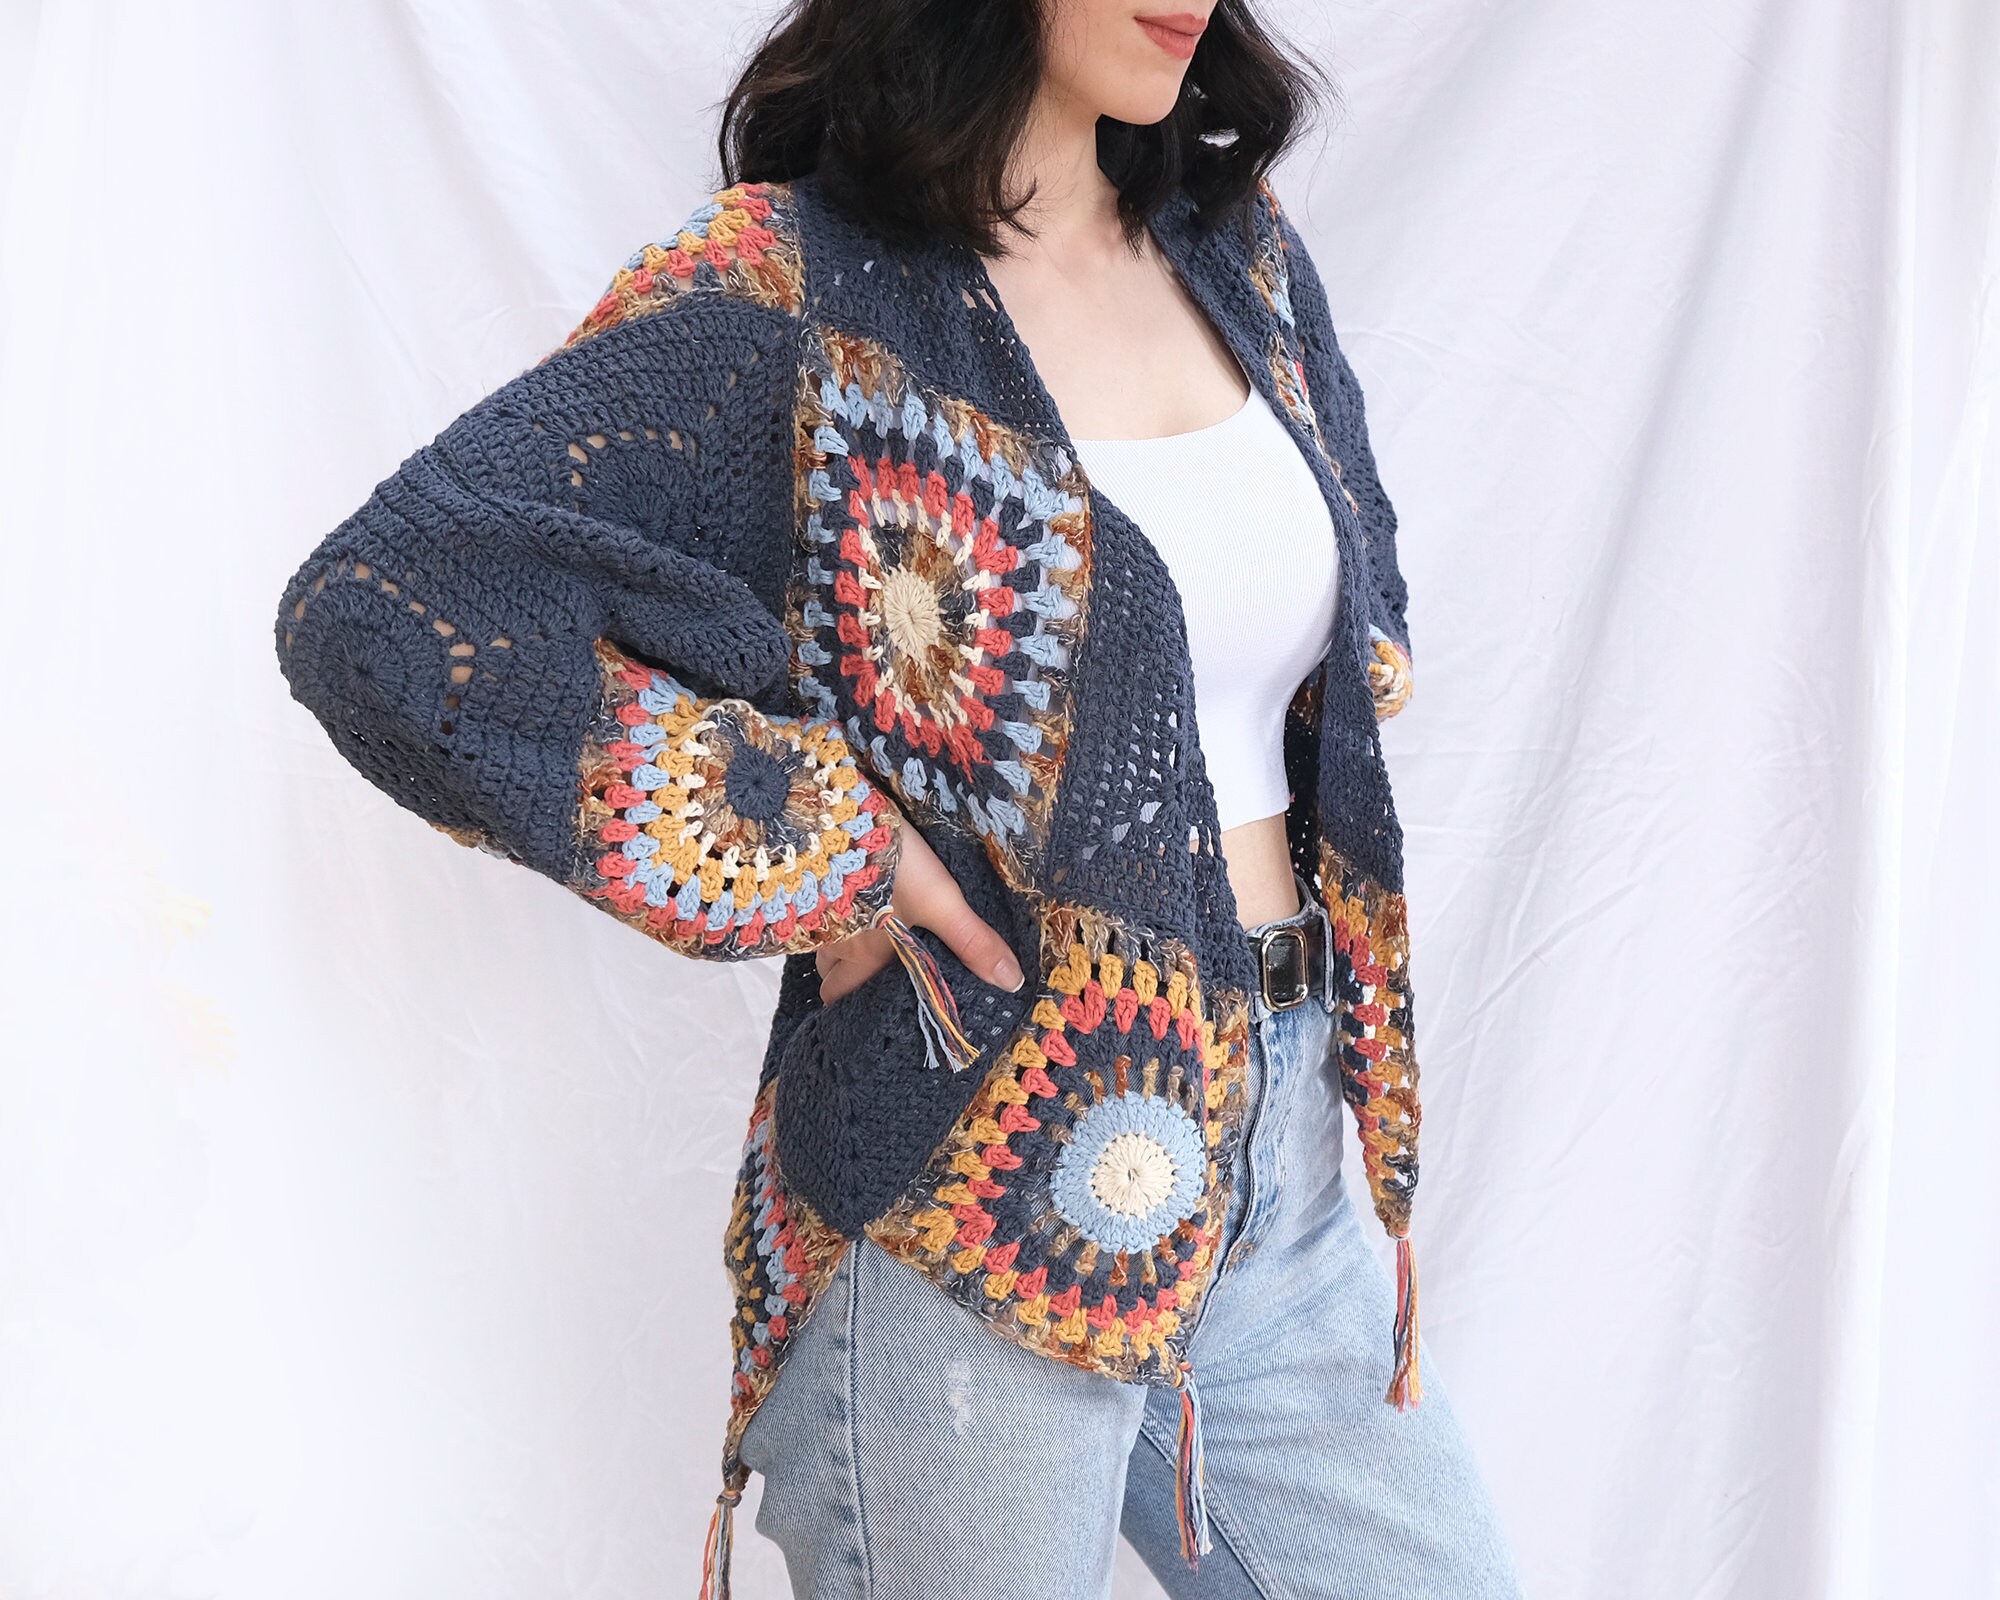 Patchwork Navy Blue Cardigan Bohemian Style Gift for Her - Etsy